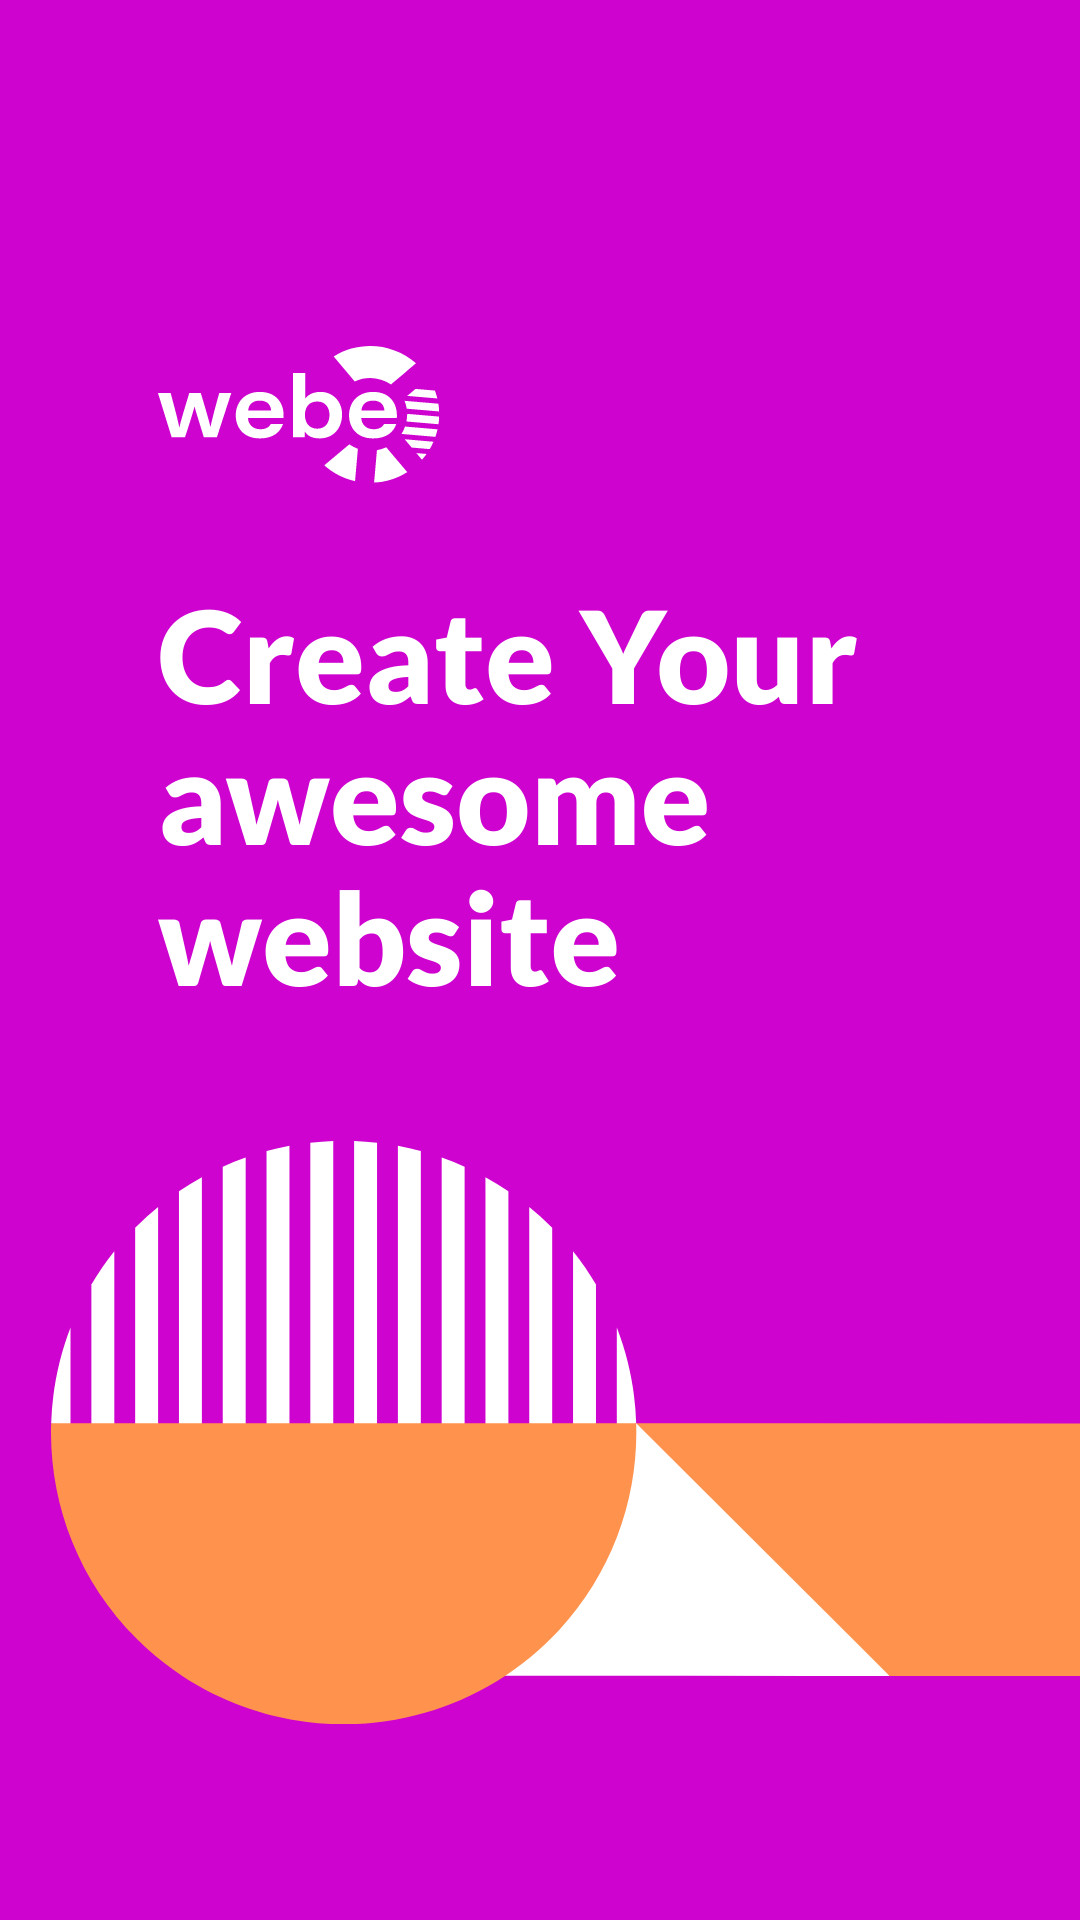 Create Your Awesome Website Offer 